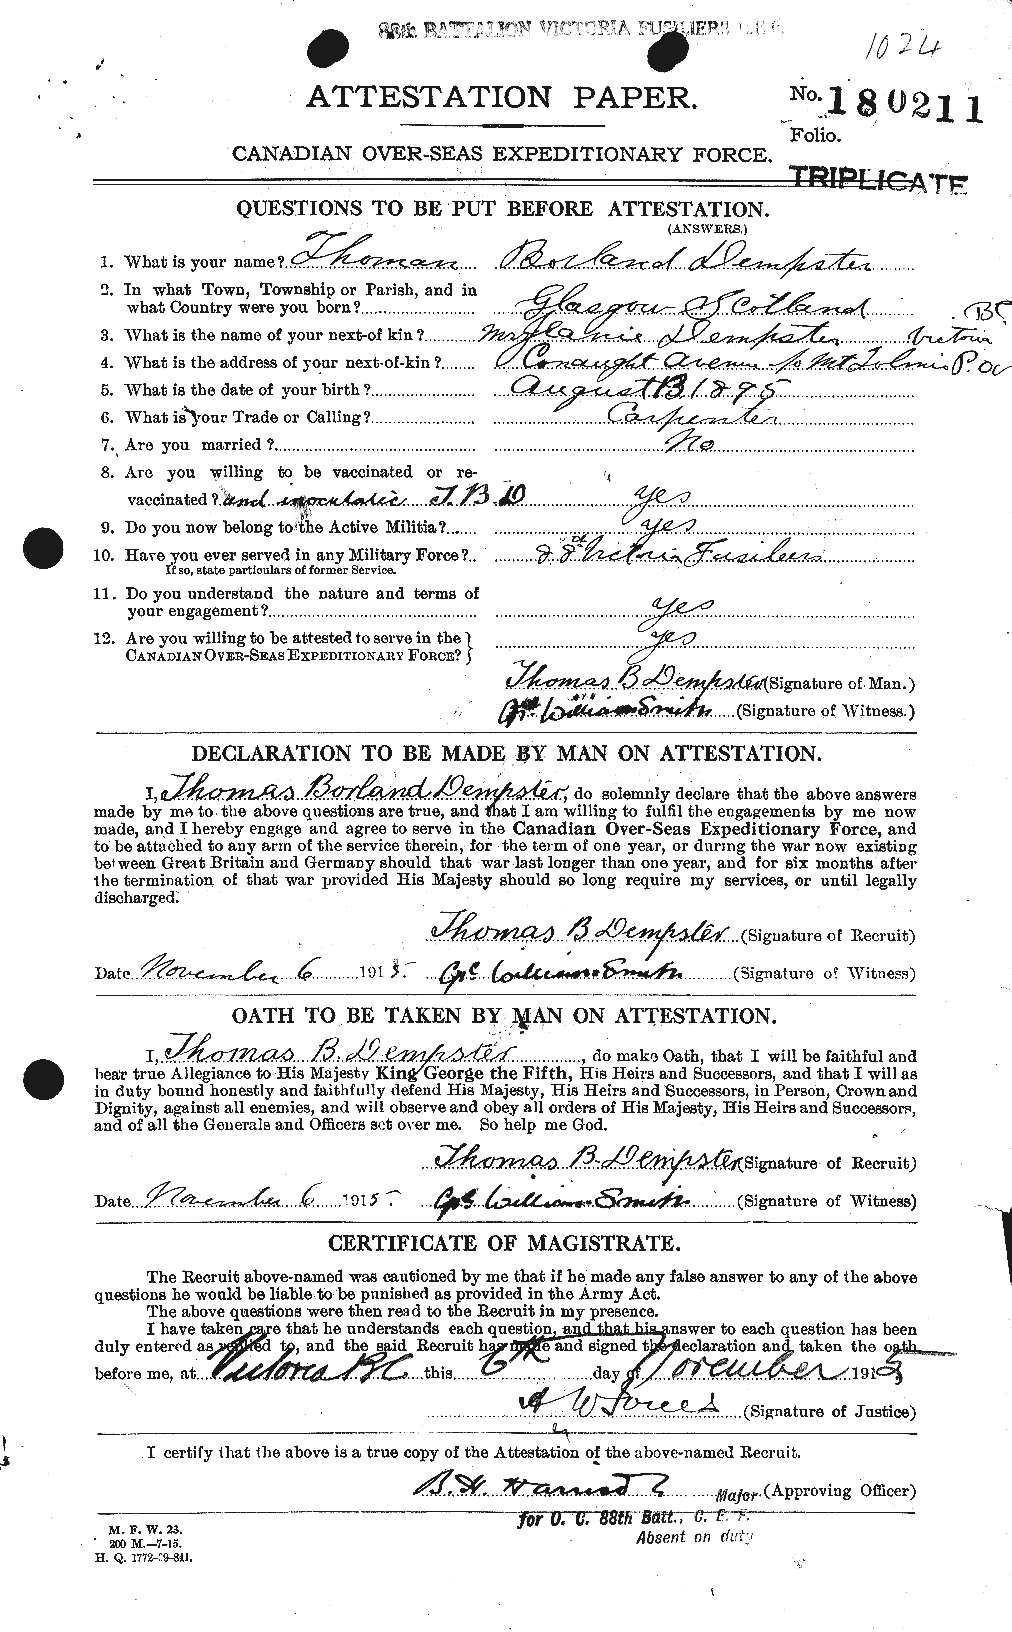 Personnel Records of the First World War - CEF 286977a